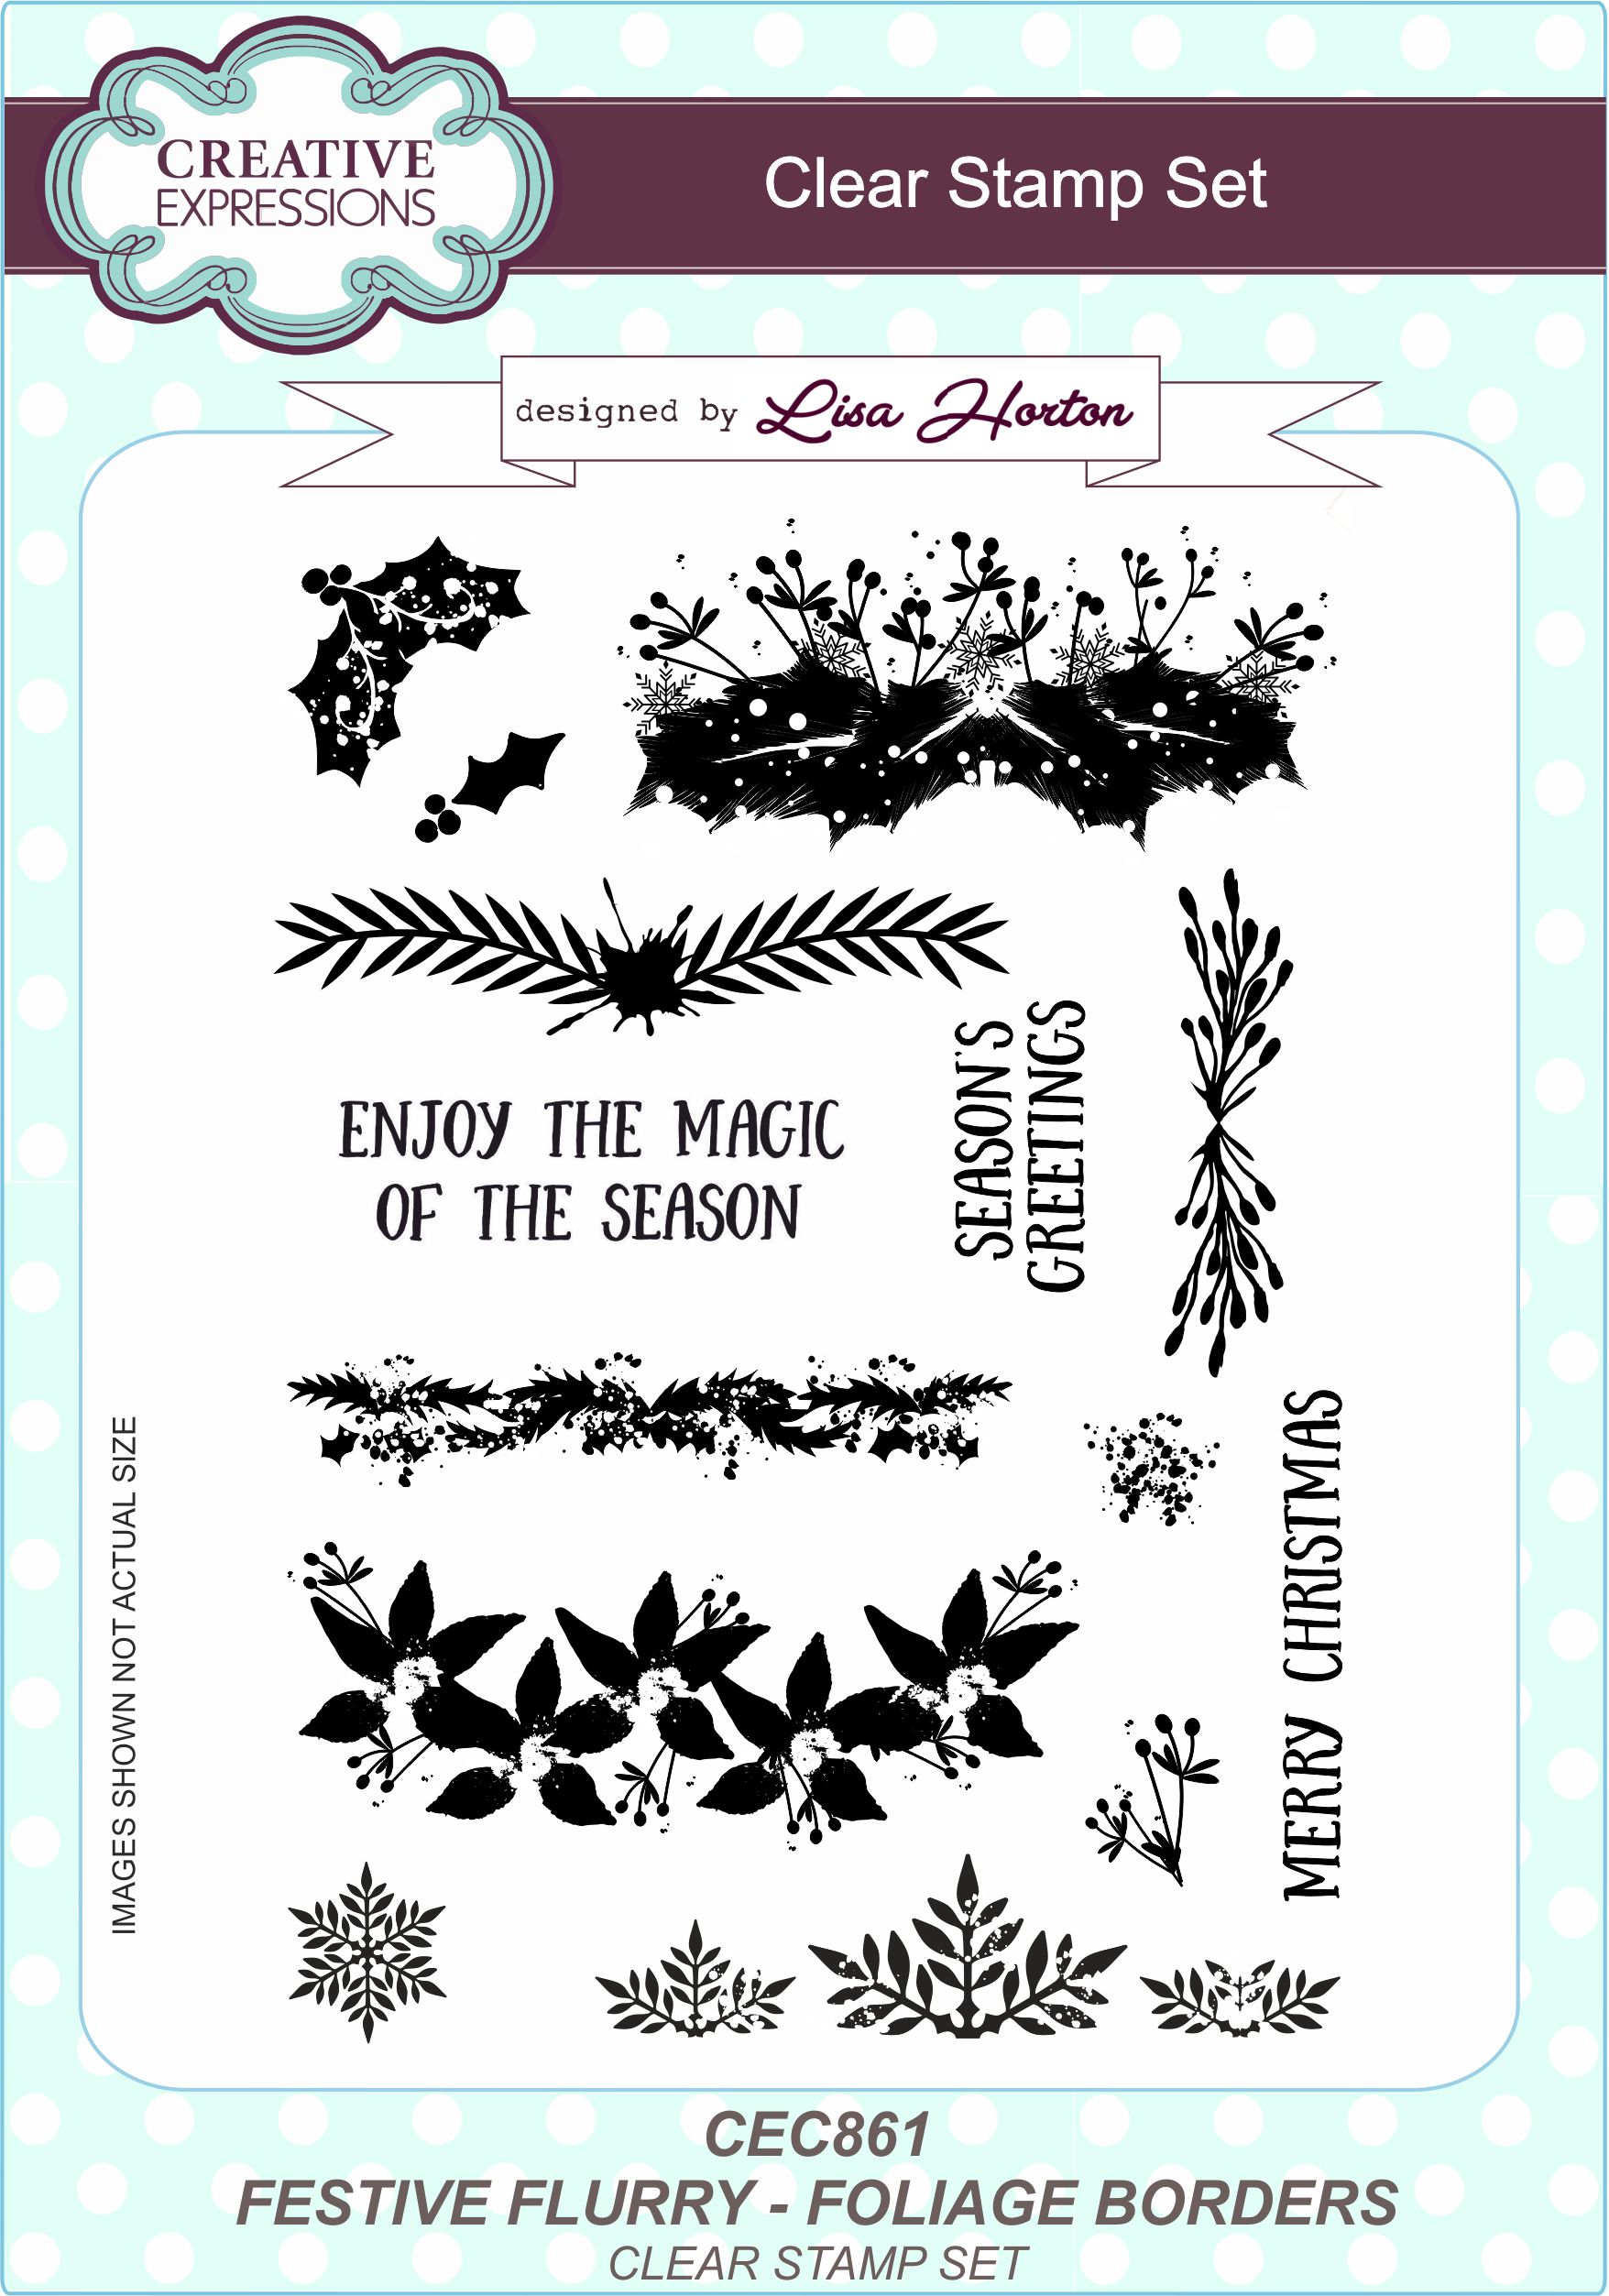 Creative Expressions Festive Flurry Foliage Borders 6 in x 8 in Clear Stamp Set